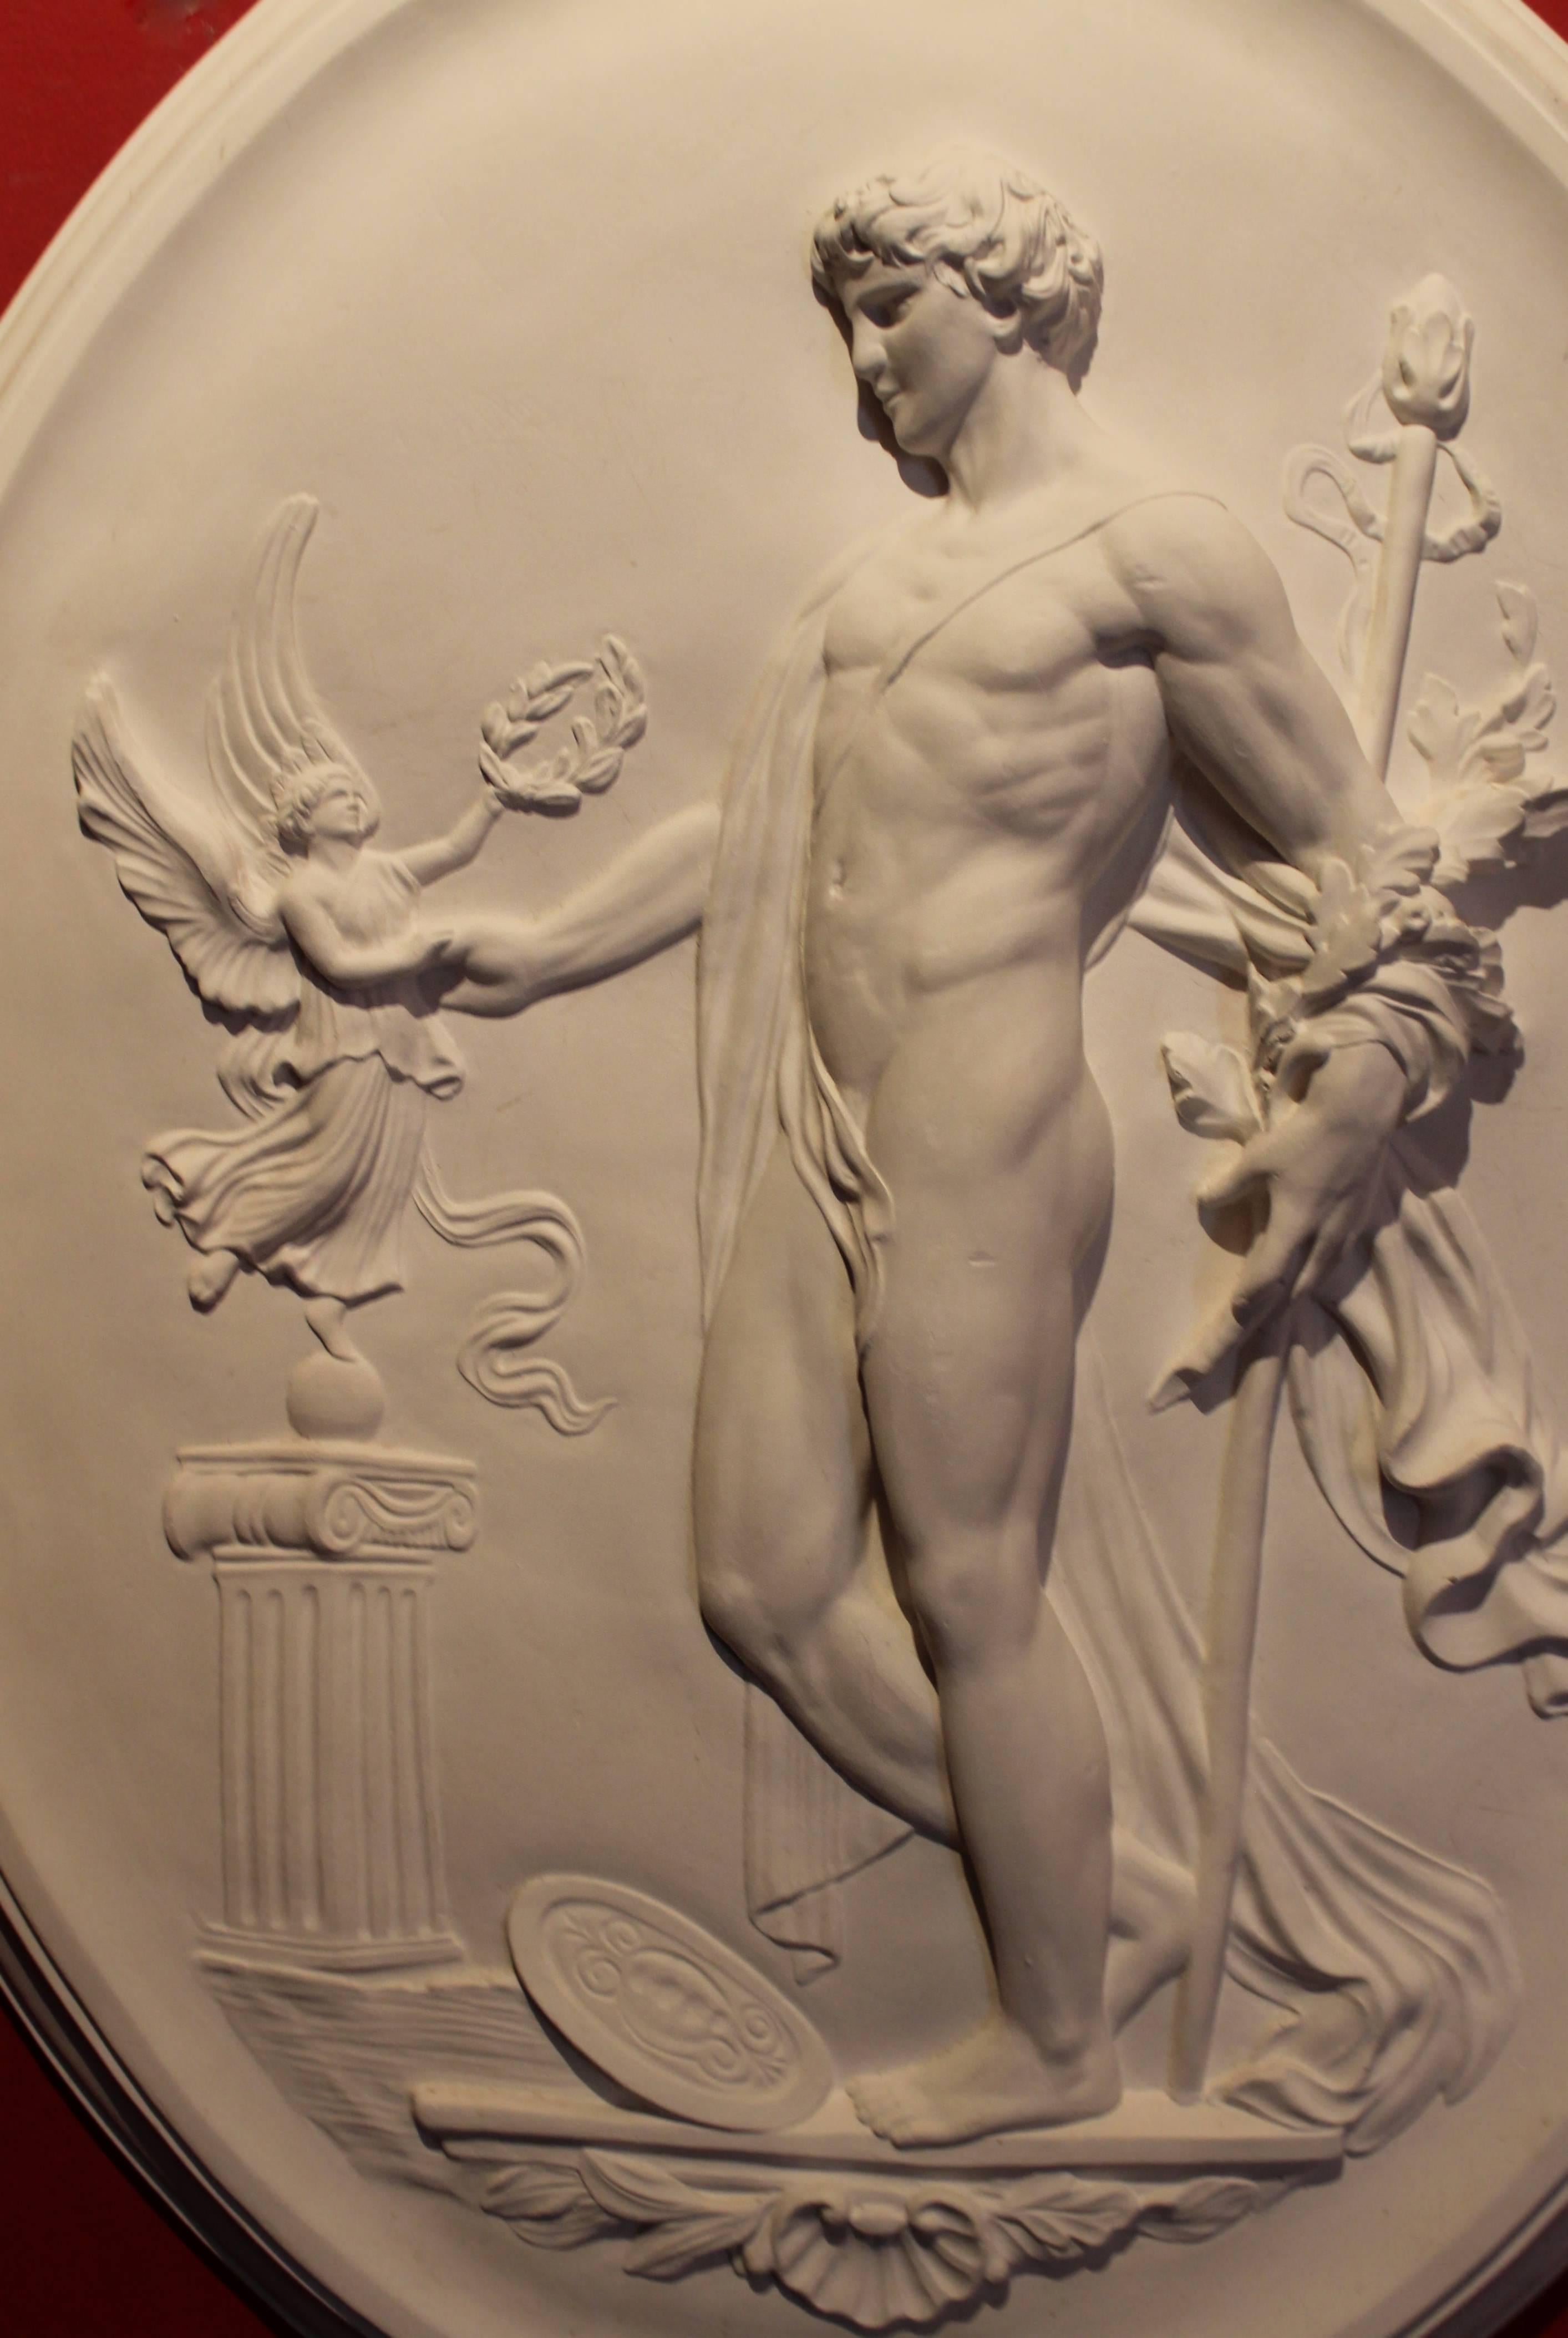 This late 19th century large white oval high relief plaster plaque represents an allegorical and mythological scene. The  male figure, Dionysus or Bacchus with the body covered by a drape, holds a wand (thyrsus) in his hand, his shield is leaning on